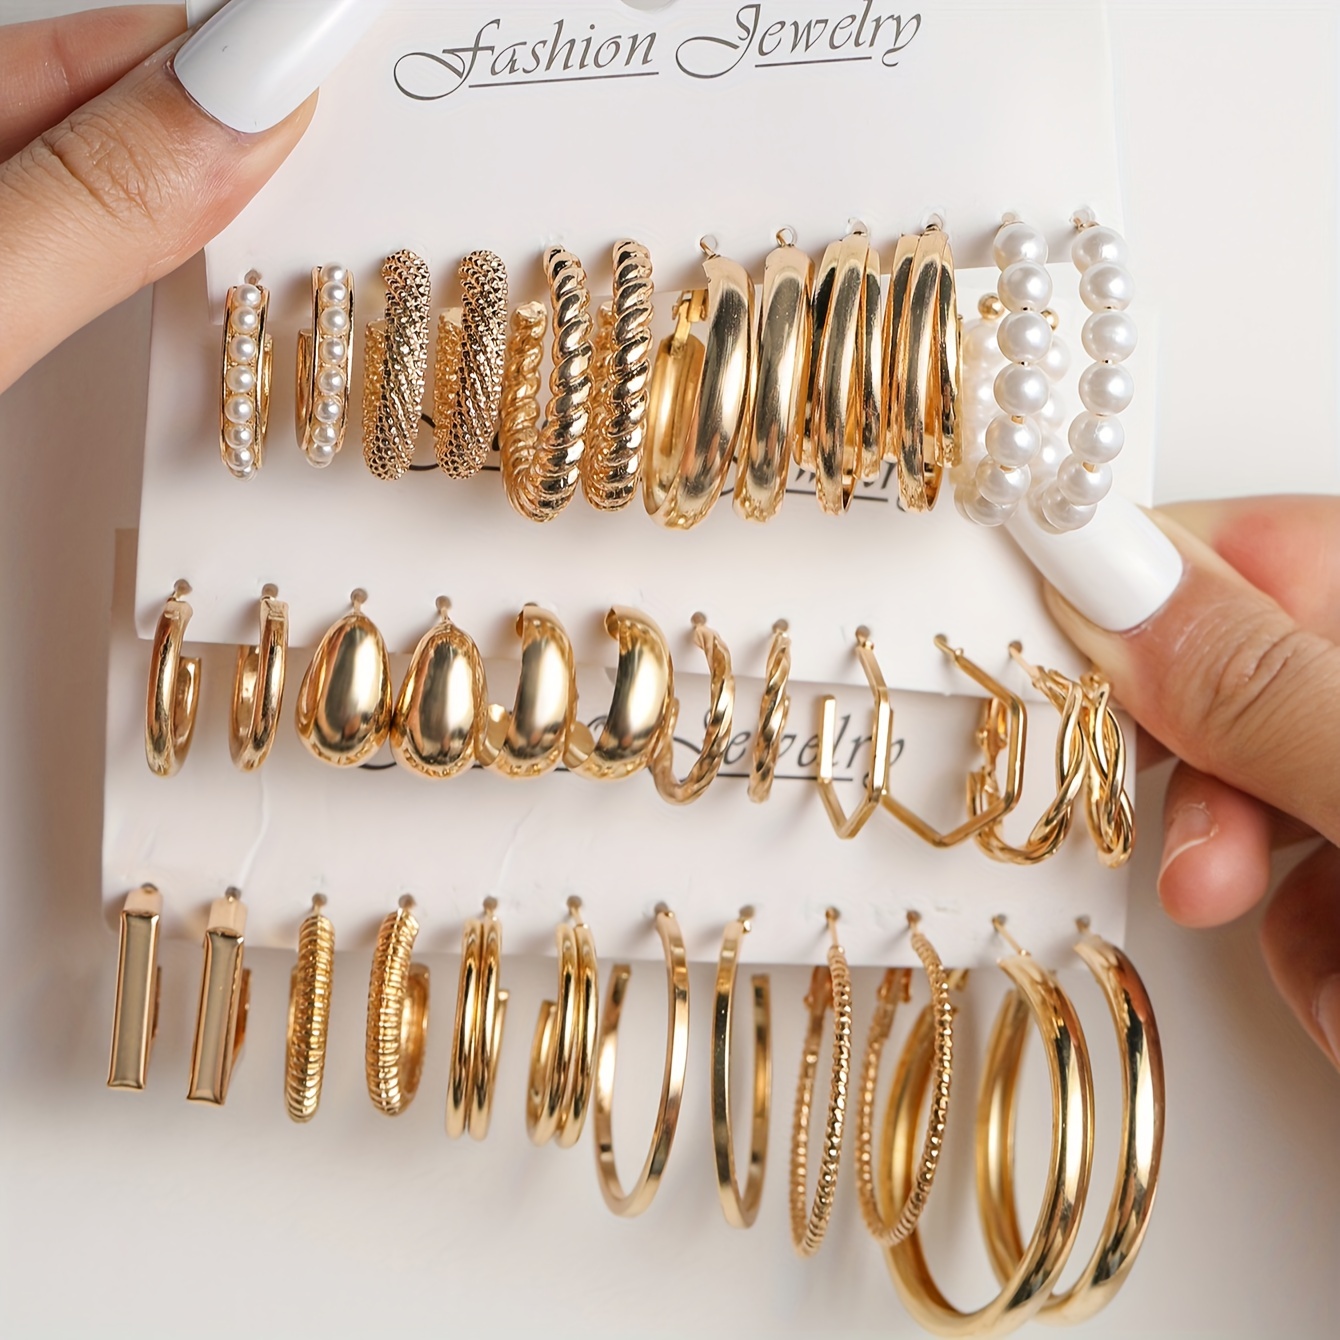 

18 Pairs/ Set Golden Hoop Earrings With Faux Pearl Decor Elegant Simple Style Zinc Alloy Jewelry Trendy Female Gift